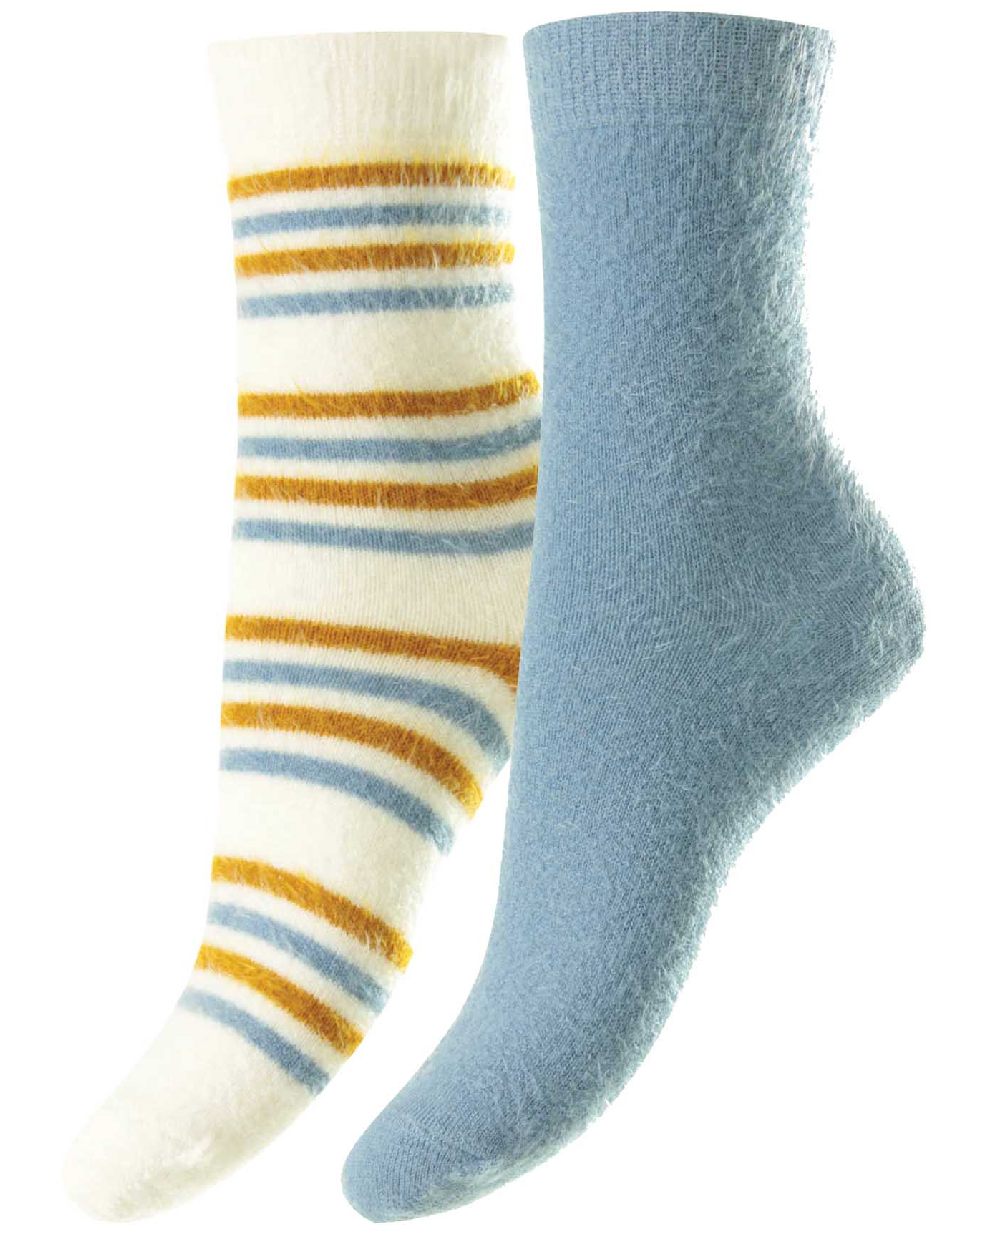 HJ Hall Fluffy Socks | 2 Pack in Cream and Pale Blue 